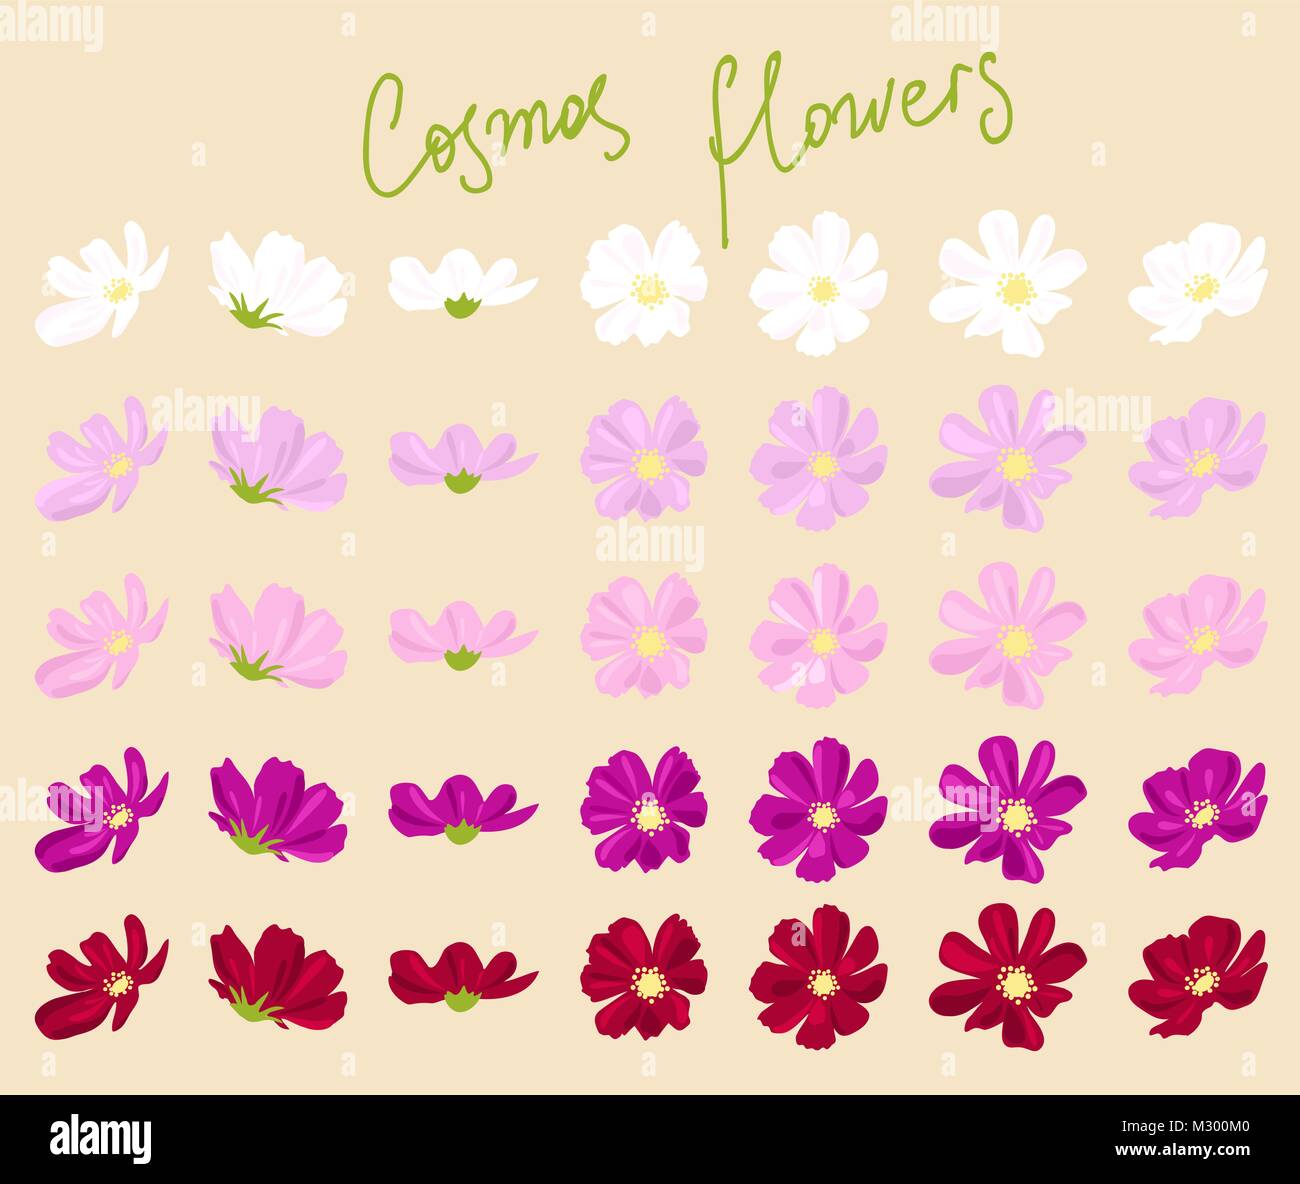 vector set of cosmos flowers of various shapes and colors Stock Vector